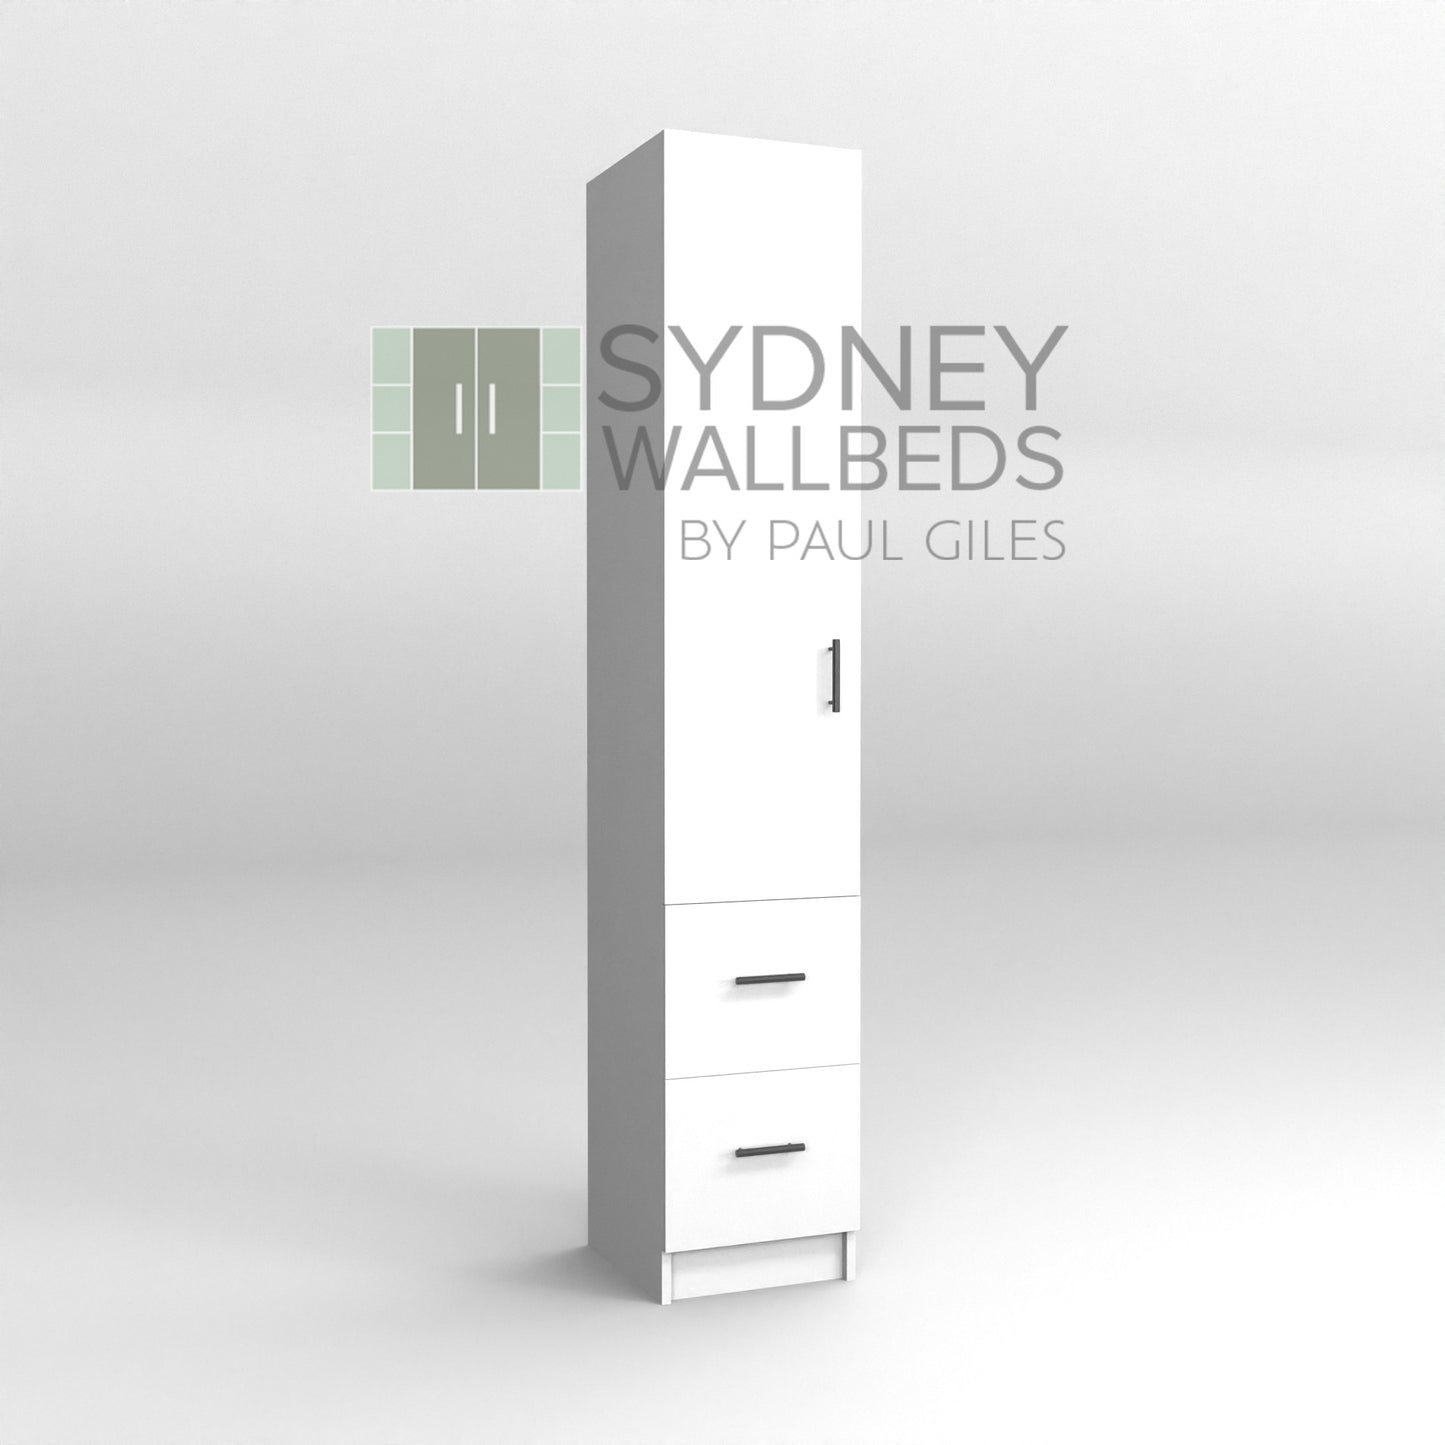 PULL-OUT HANGING CABINETS 470mm - Alpha WallBed - (Premium Colour Range)